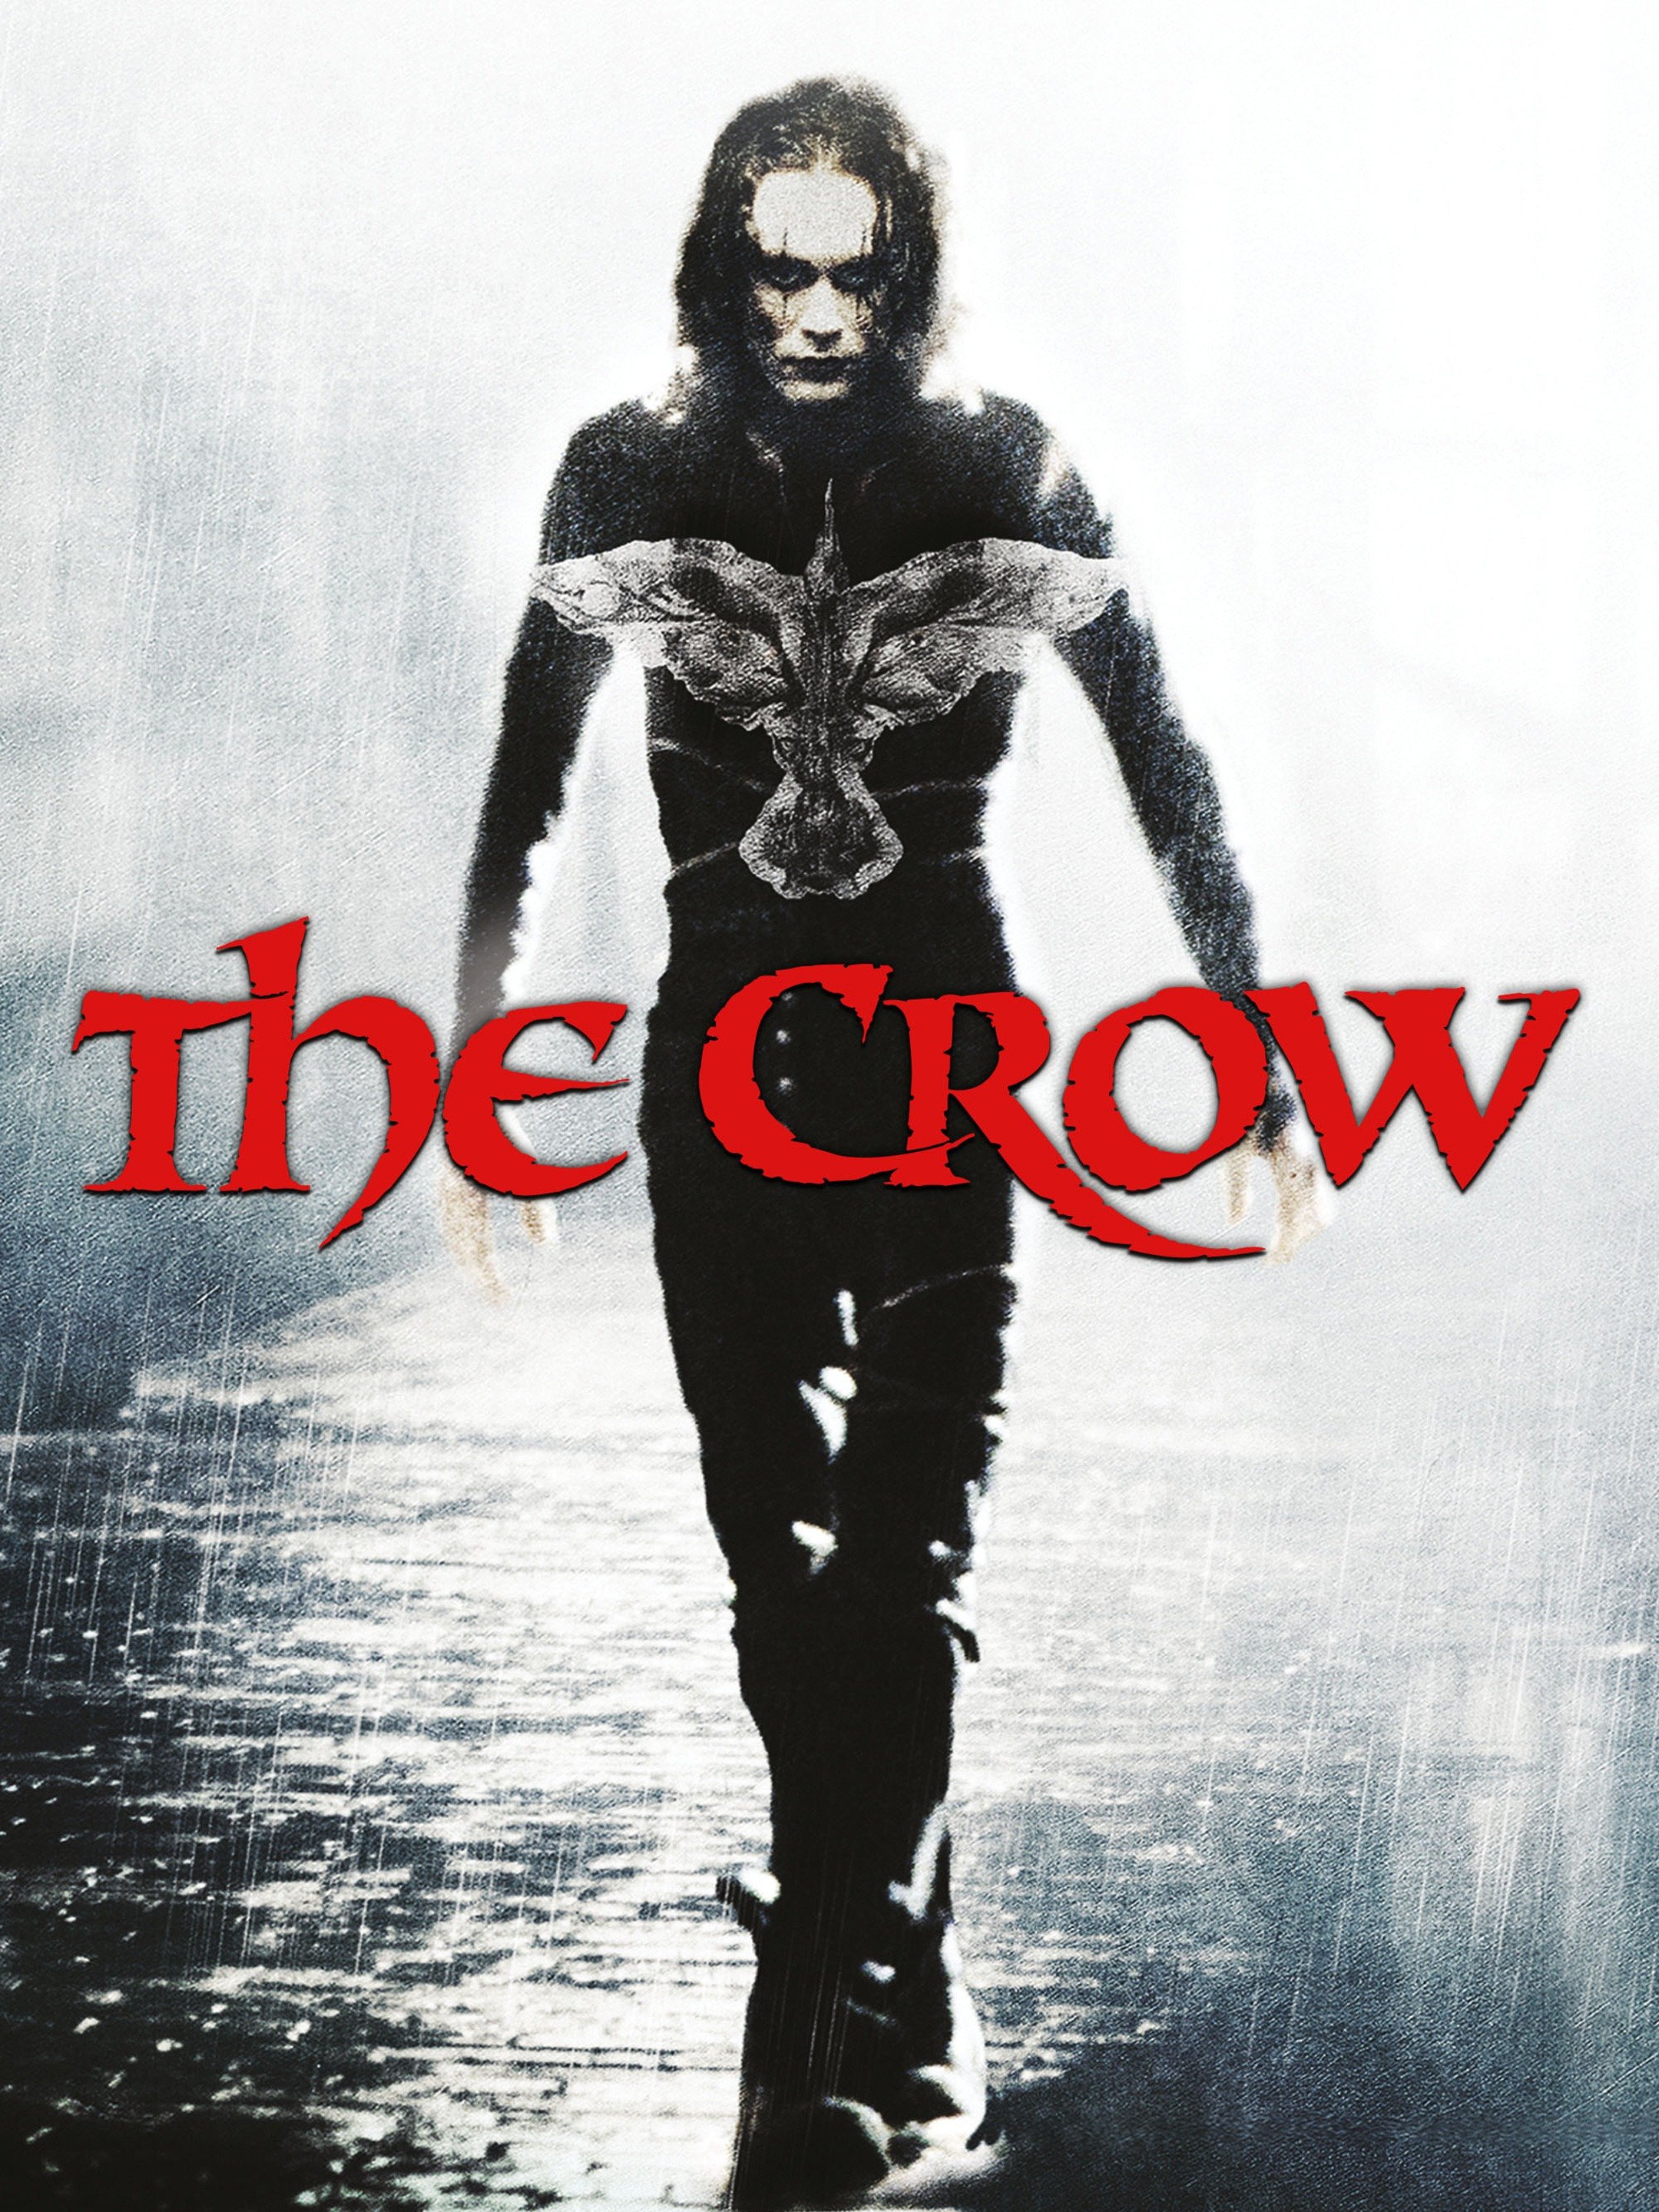 Crow - Rotten Tomatoes